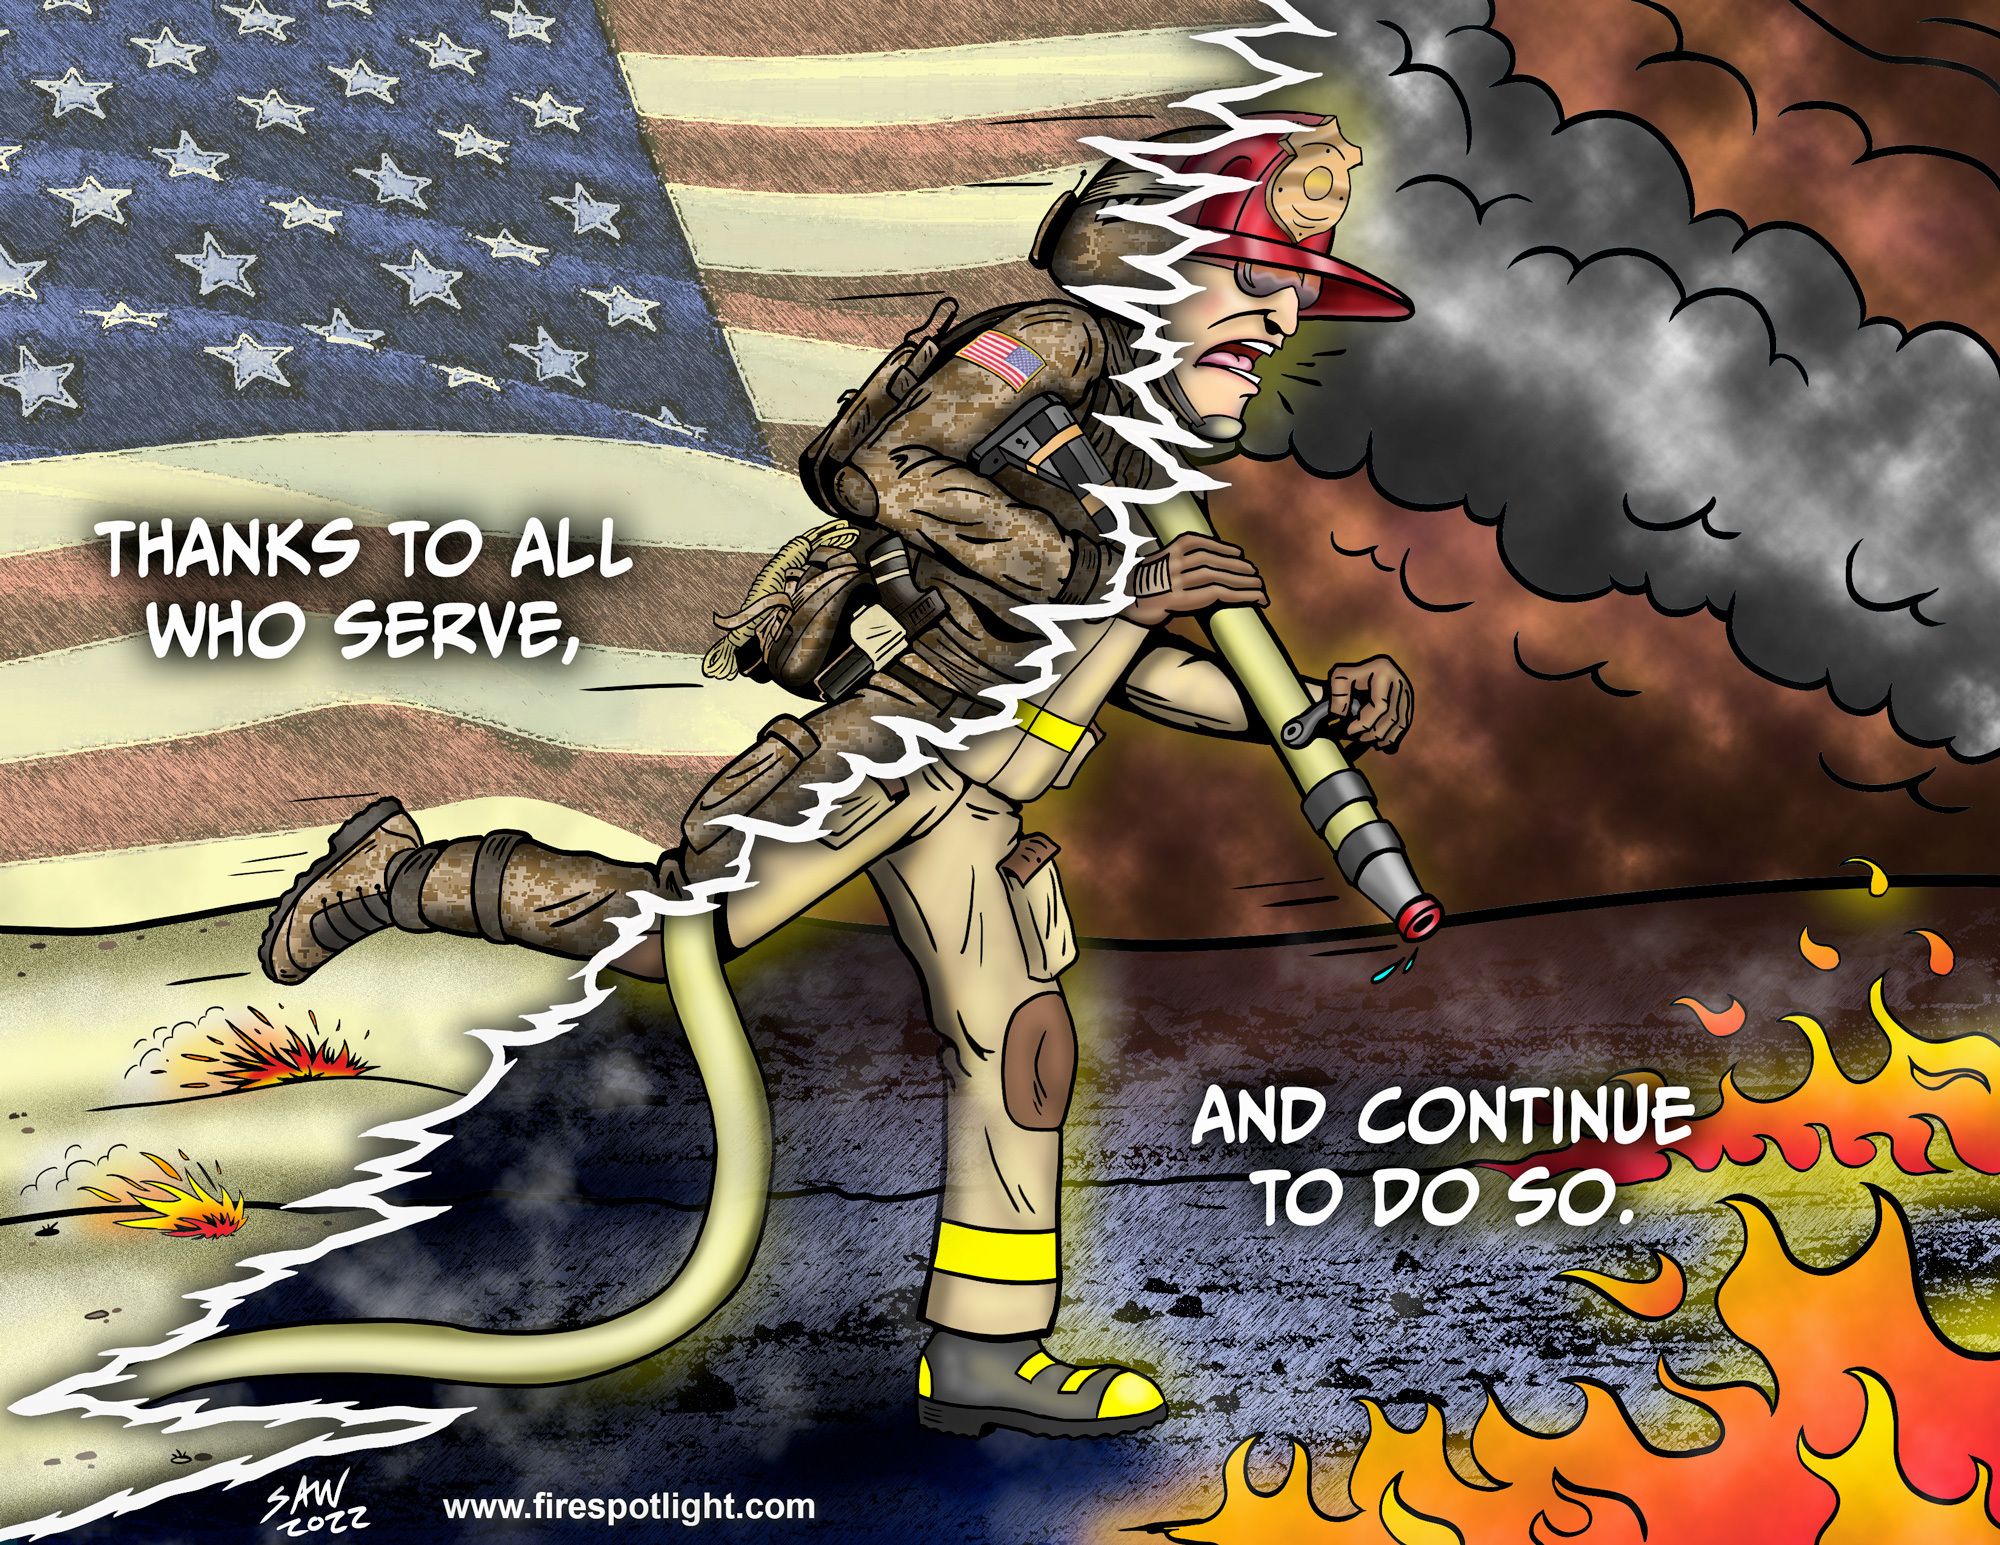 Featured image for “Thank You Veterans”